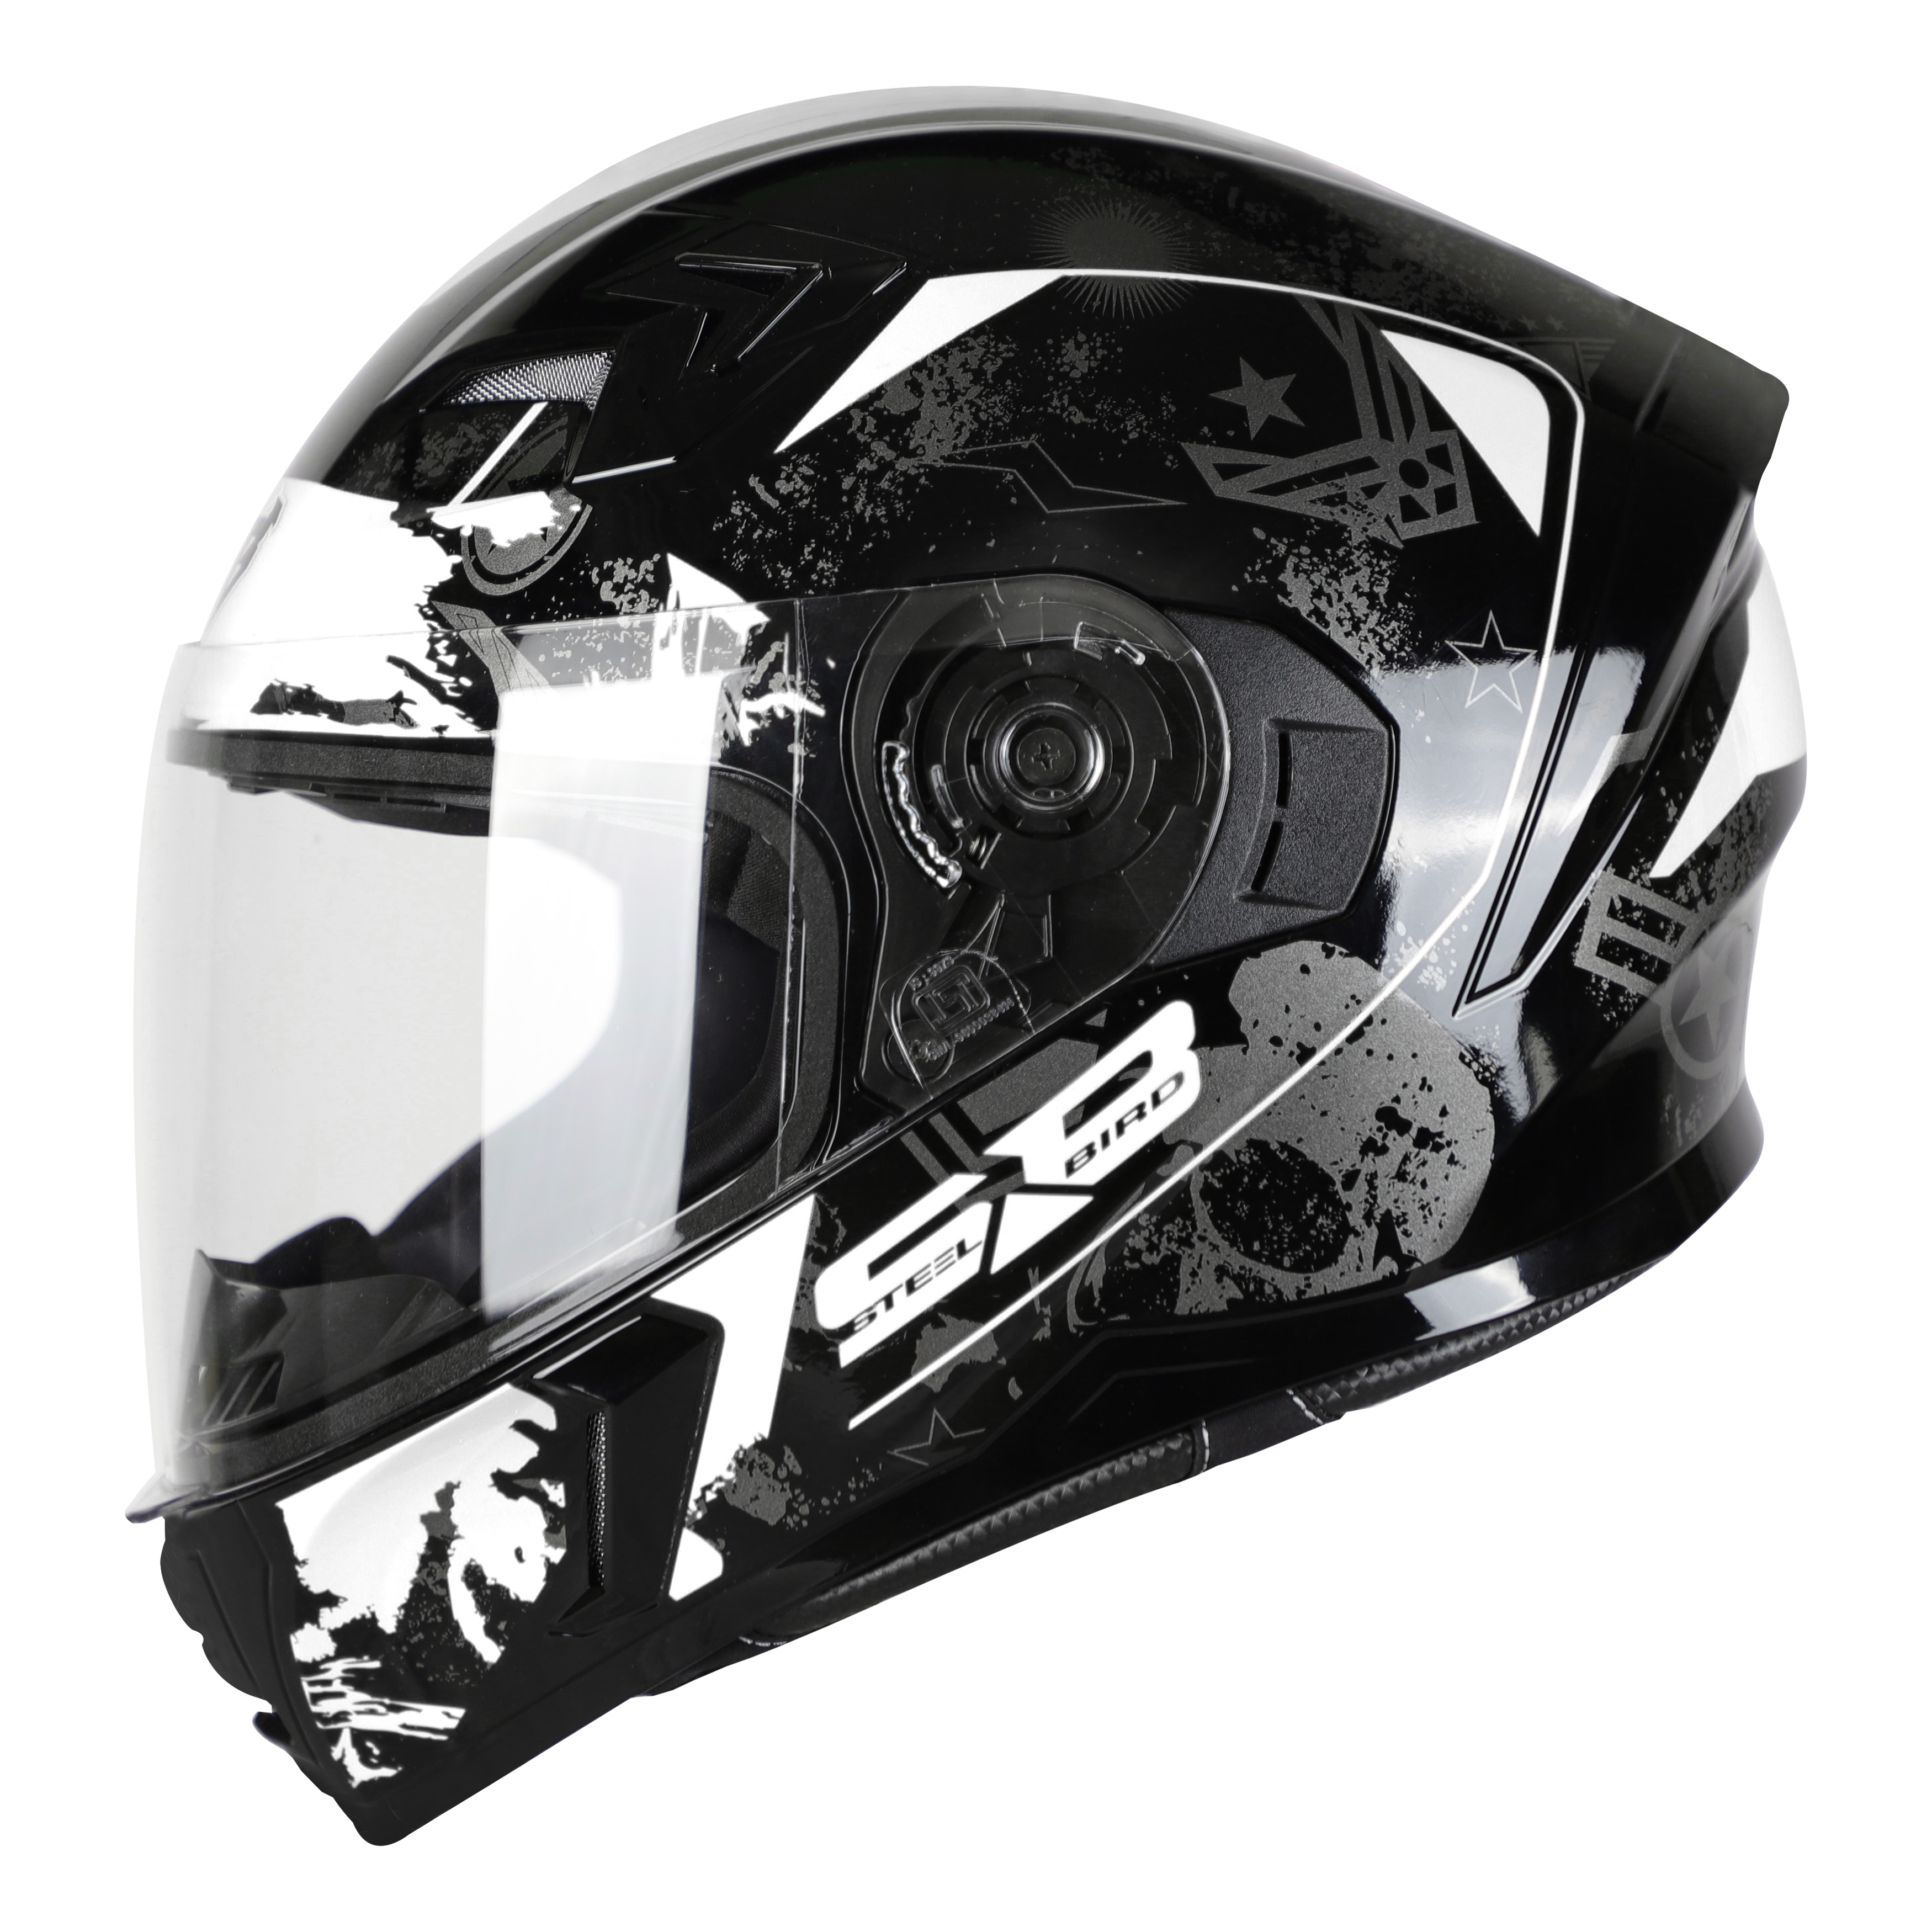 SBA-21 COMBAT GLOSSY BLACK WITH WHITE (WITH HIGH-END INTERIOR)